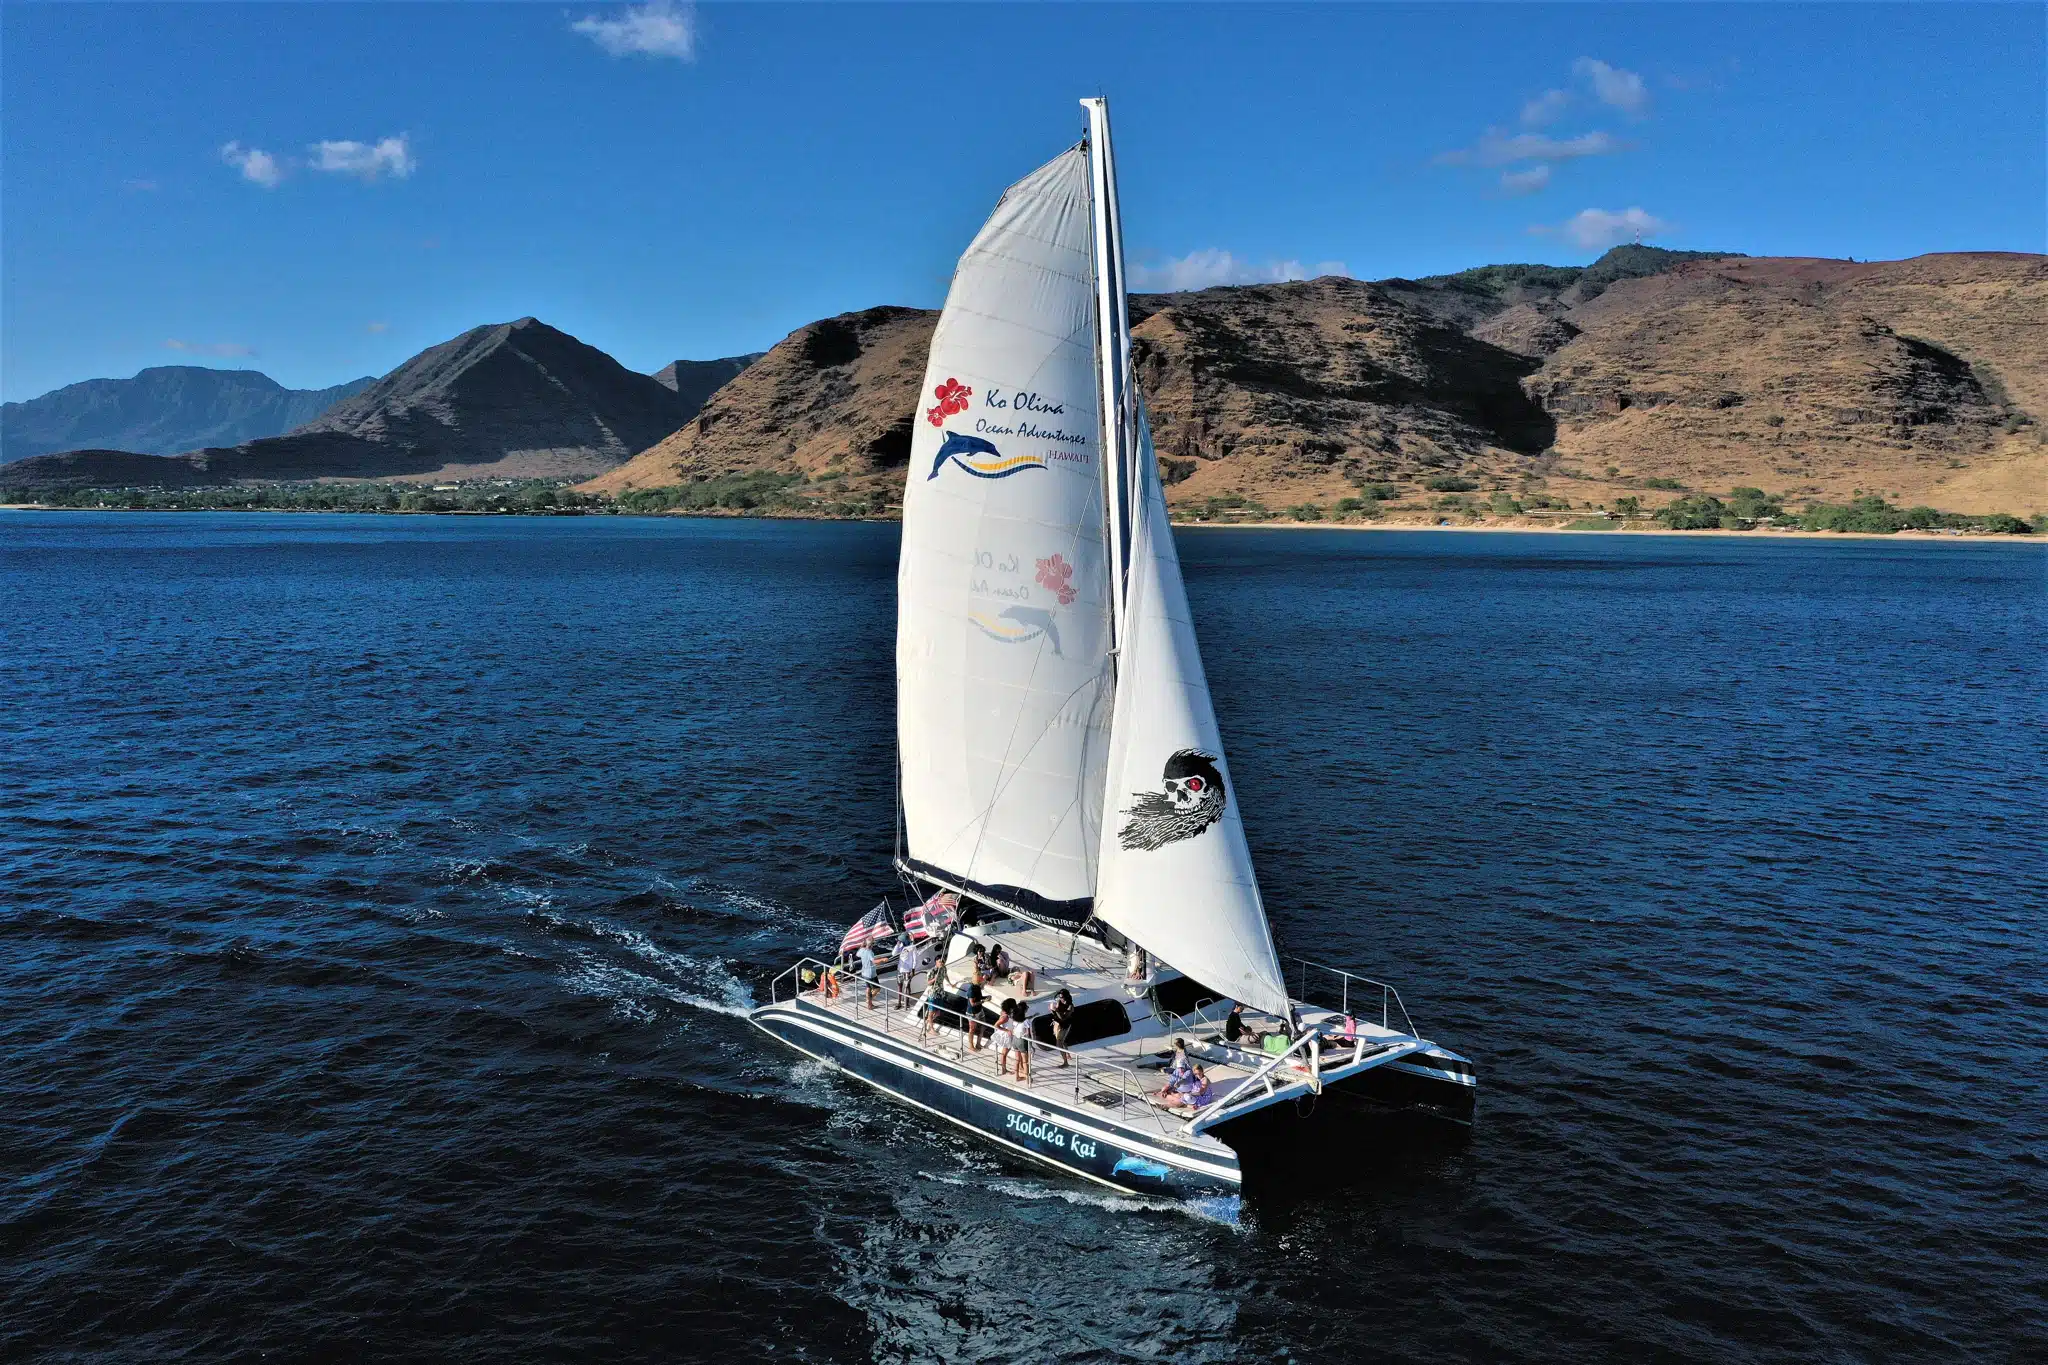 Catamaran Snorkel Sail - Midday is a Boat Activity located in the city of Kapolei on Oahu, Hawaii